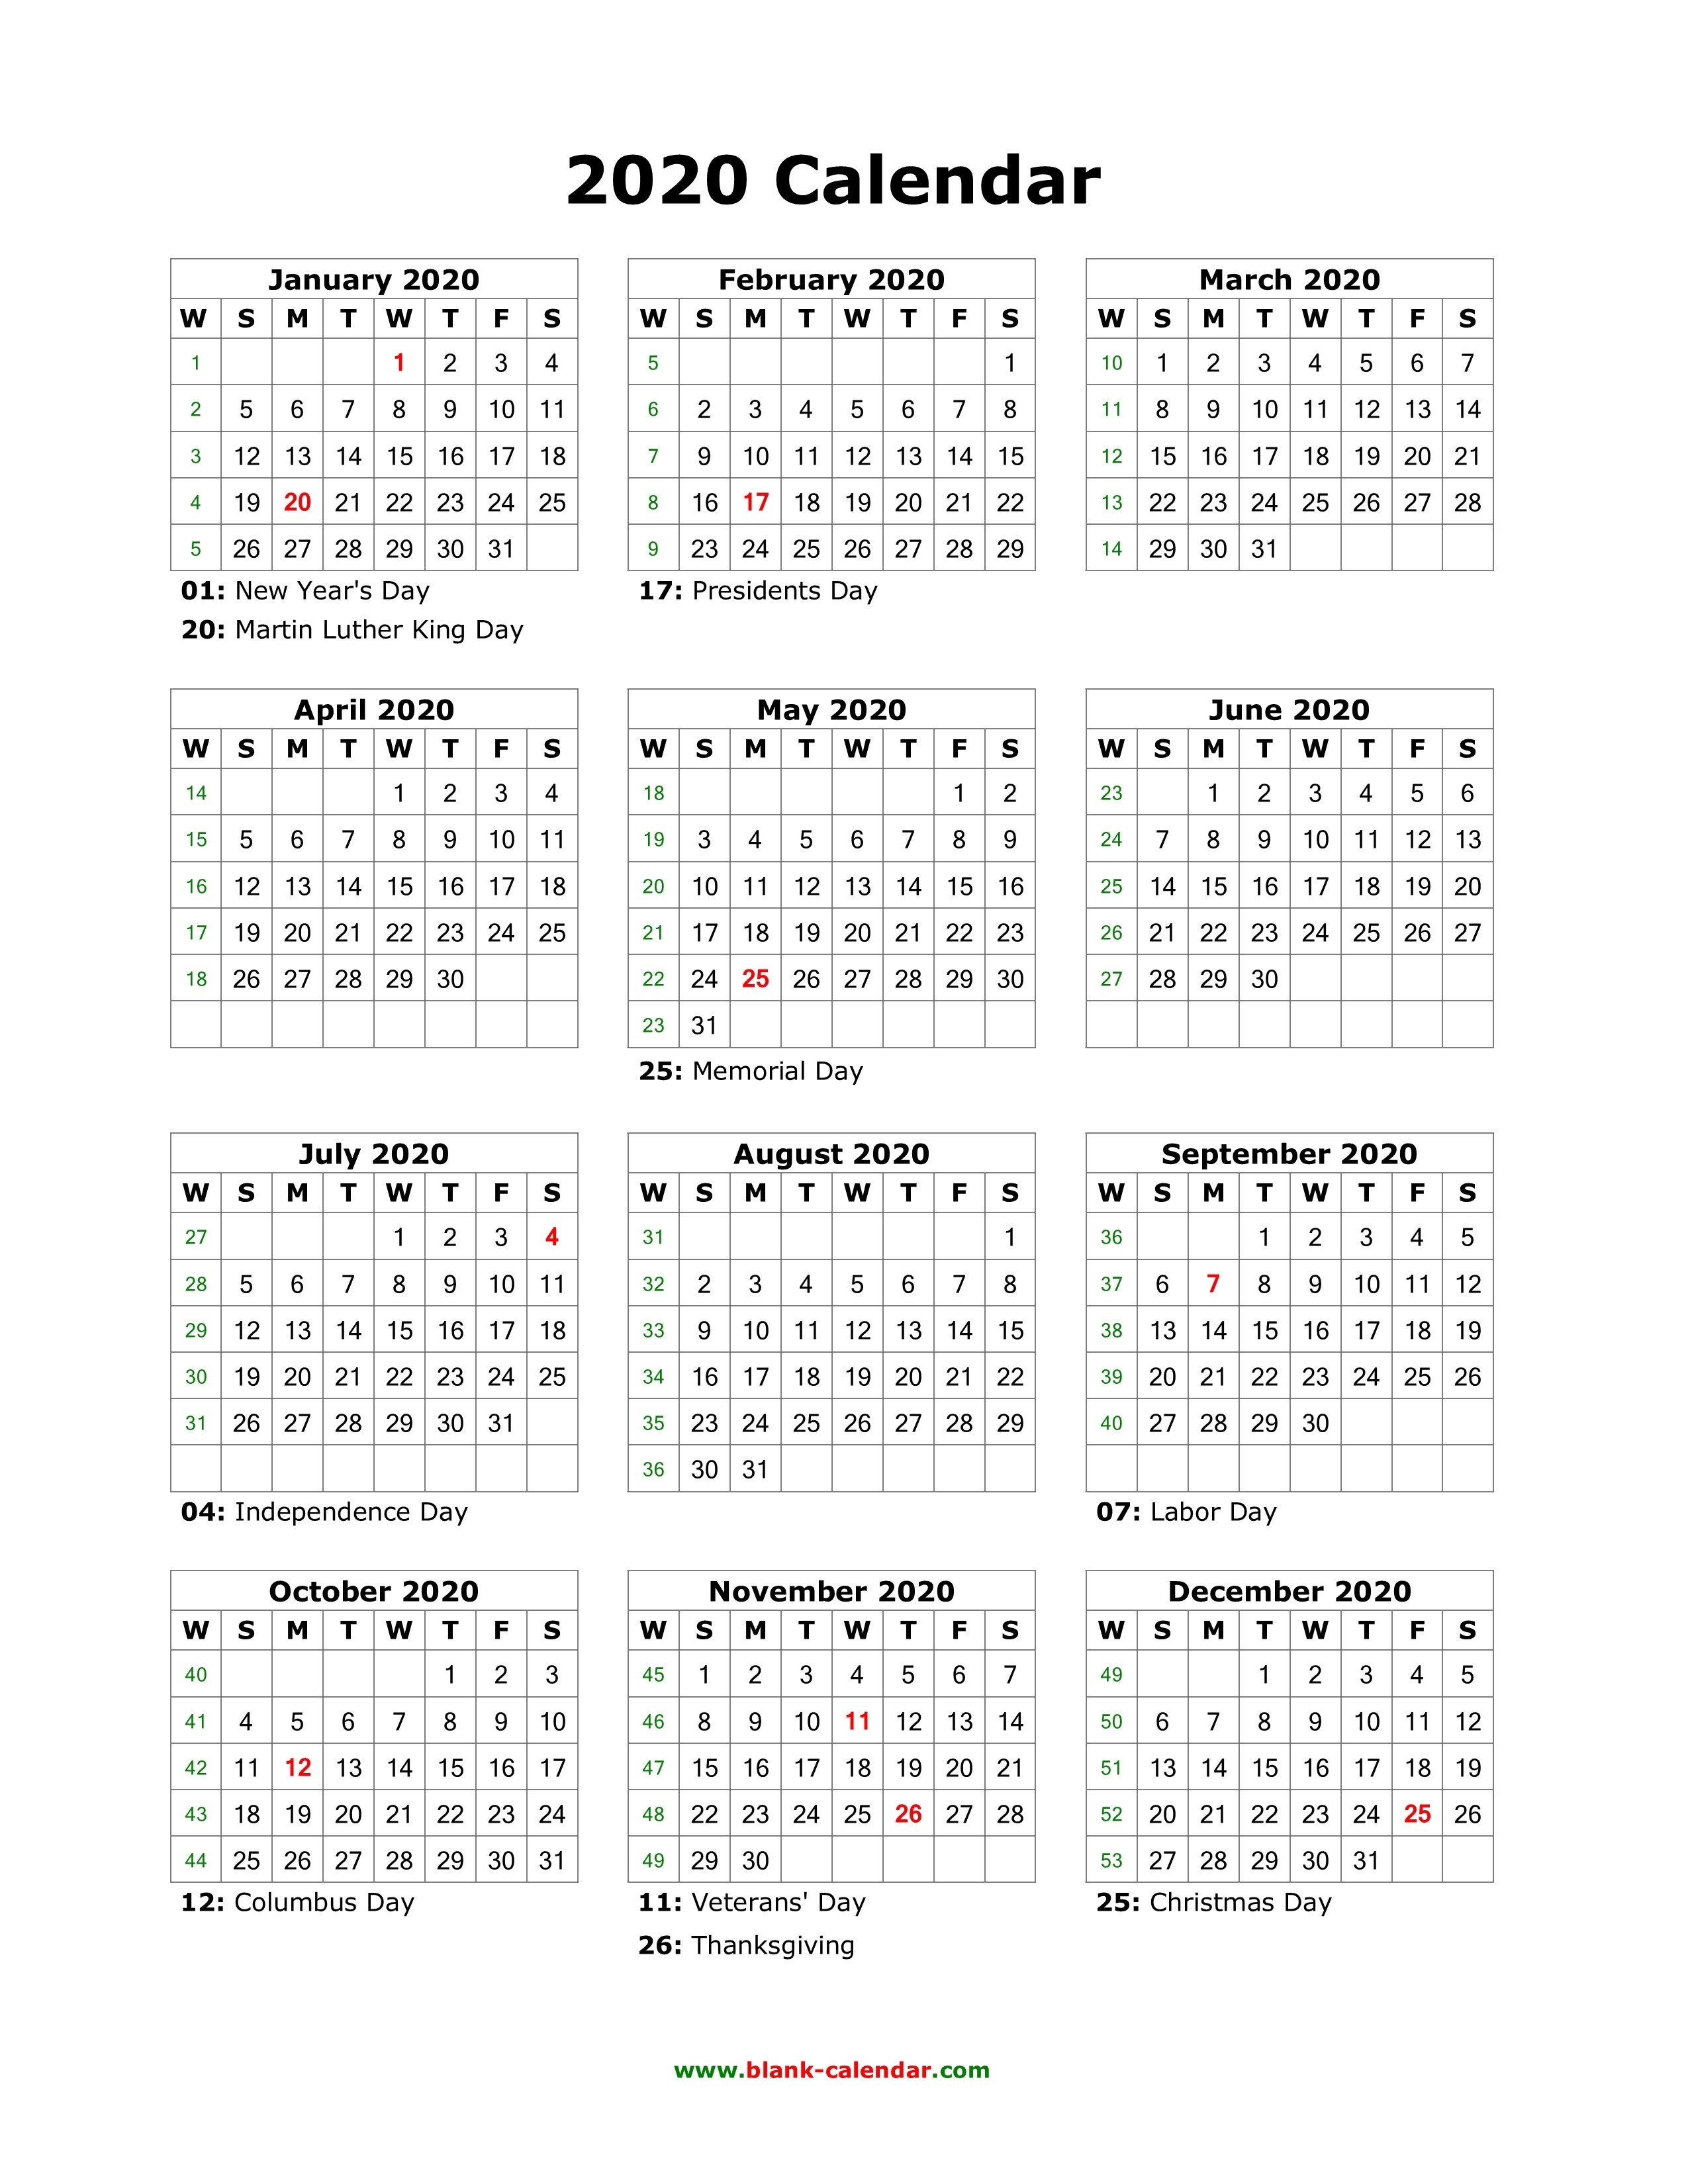 Download Blank Calendar 2020 With Us Holidays (12 Months On-Monday To Sunday Blank Calendar 2020 With Holidays